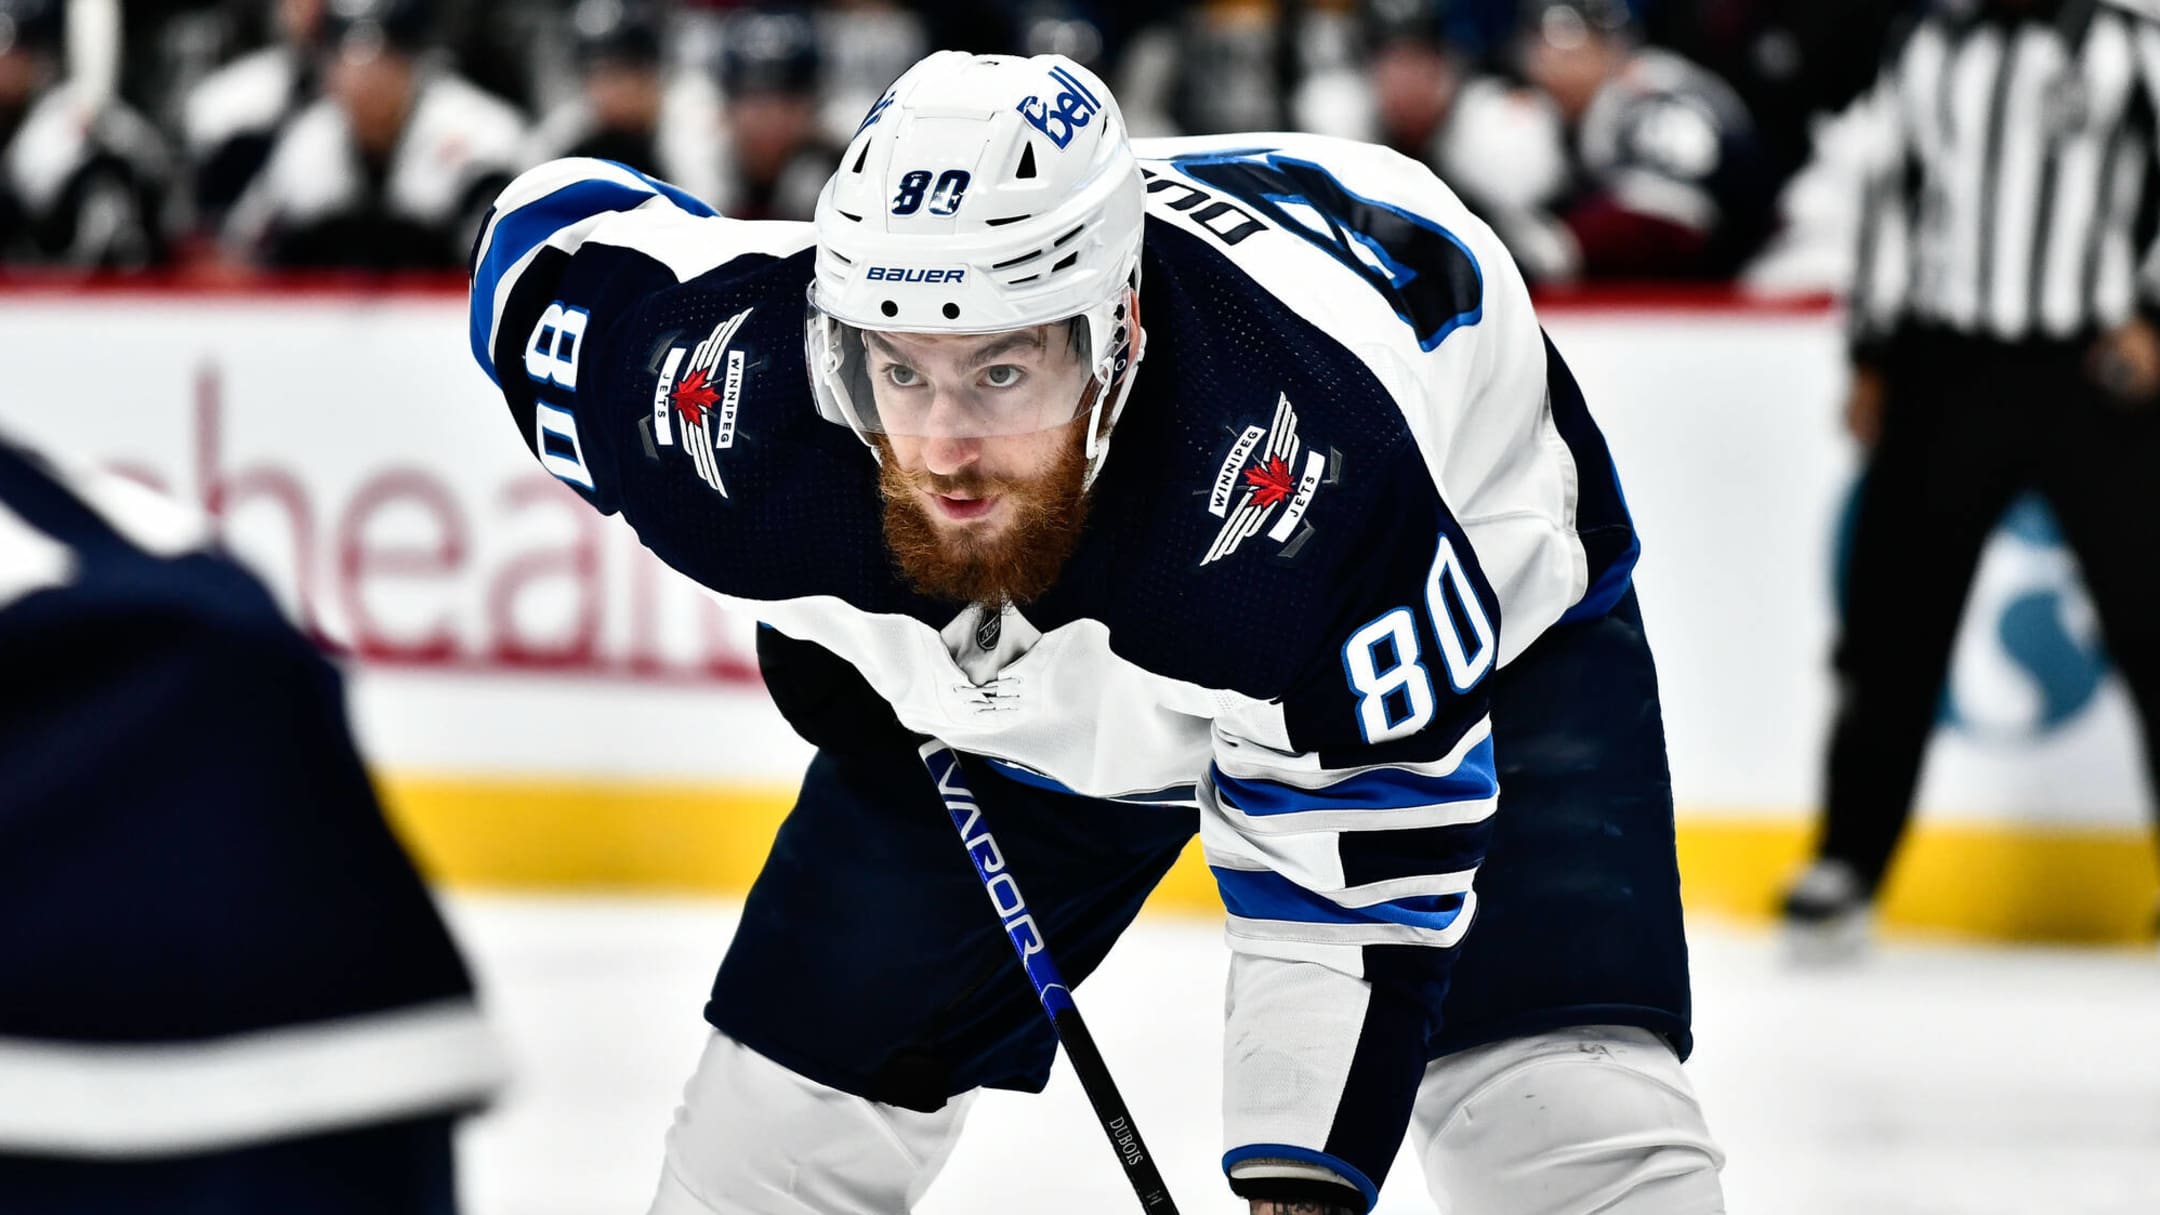 Blake Wheeler: Best Powerplay Playmaker in the NHL - The Point